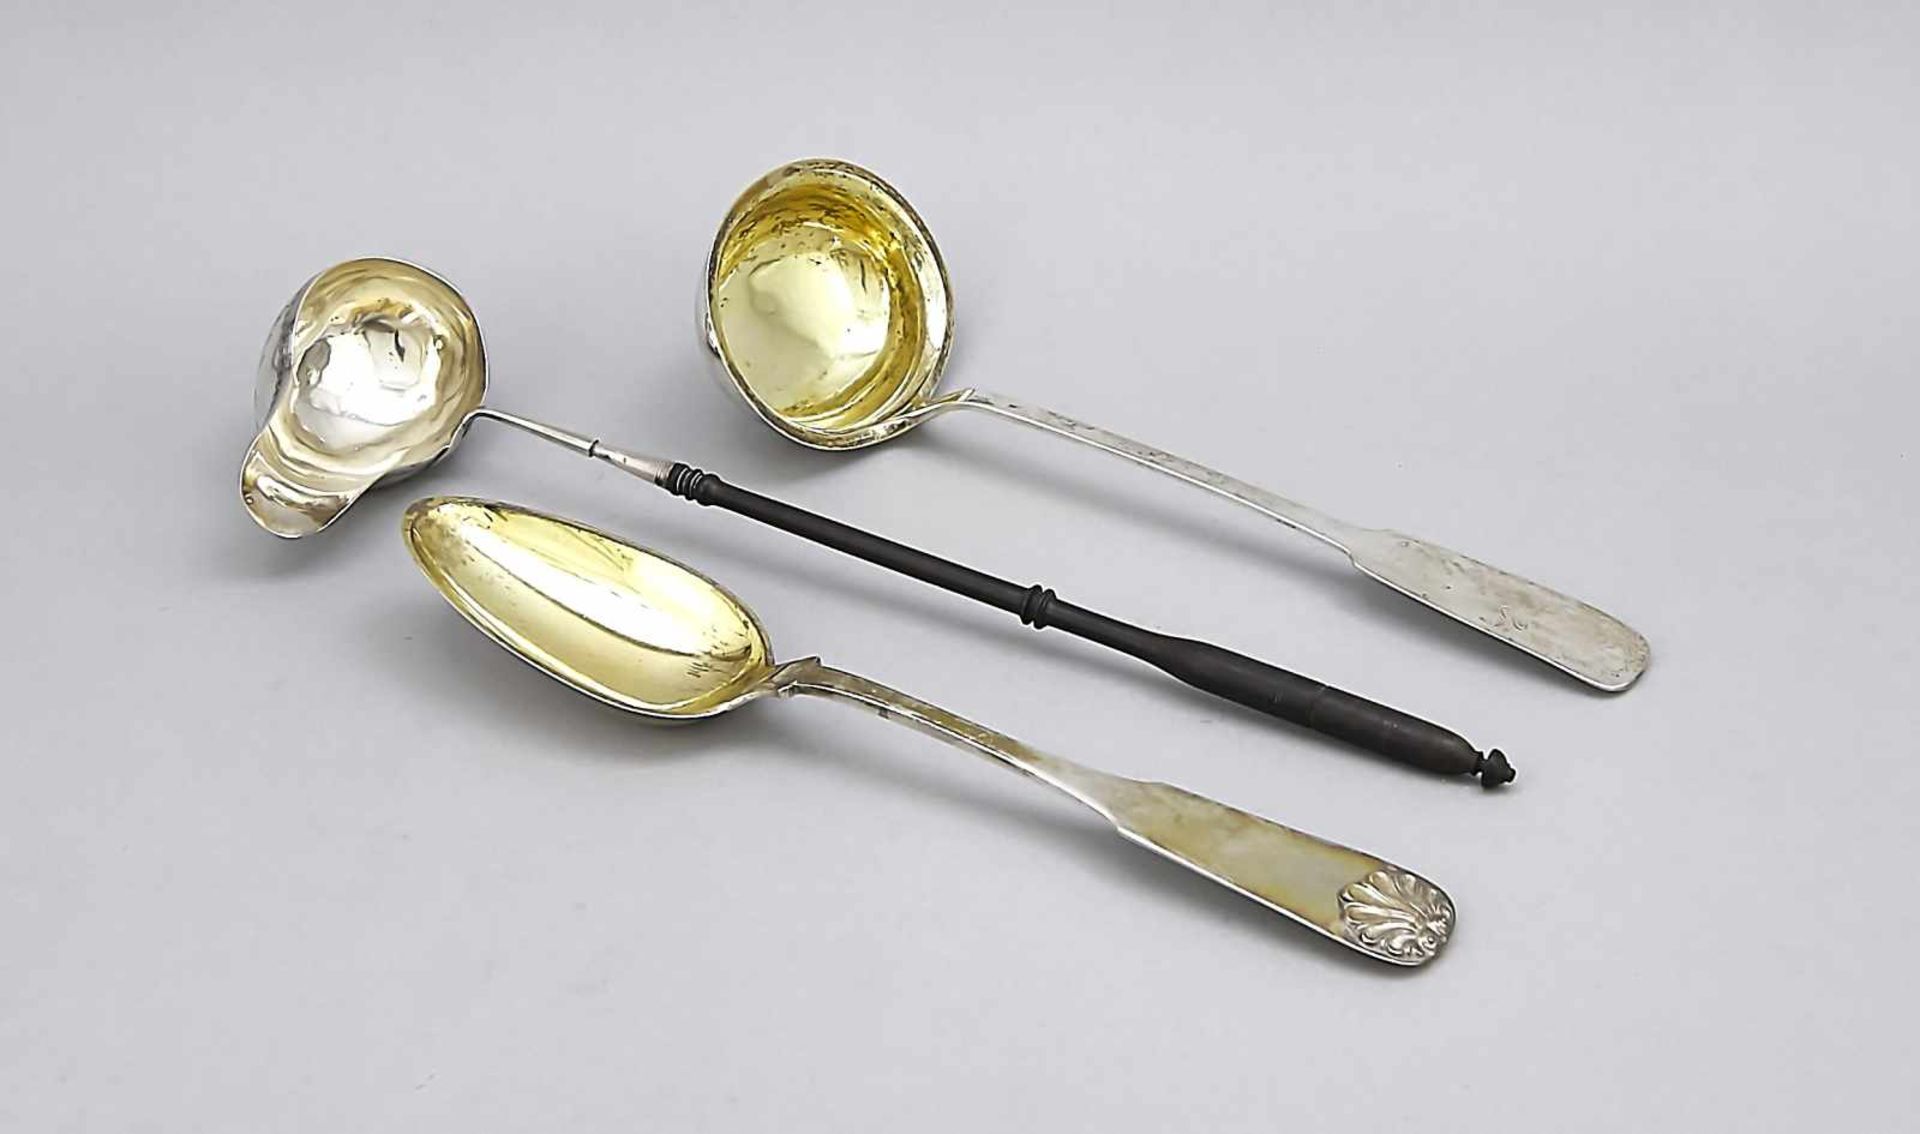 Two ladles and a serving spoon, around 1900, different manufacturers, silver different